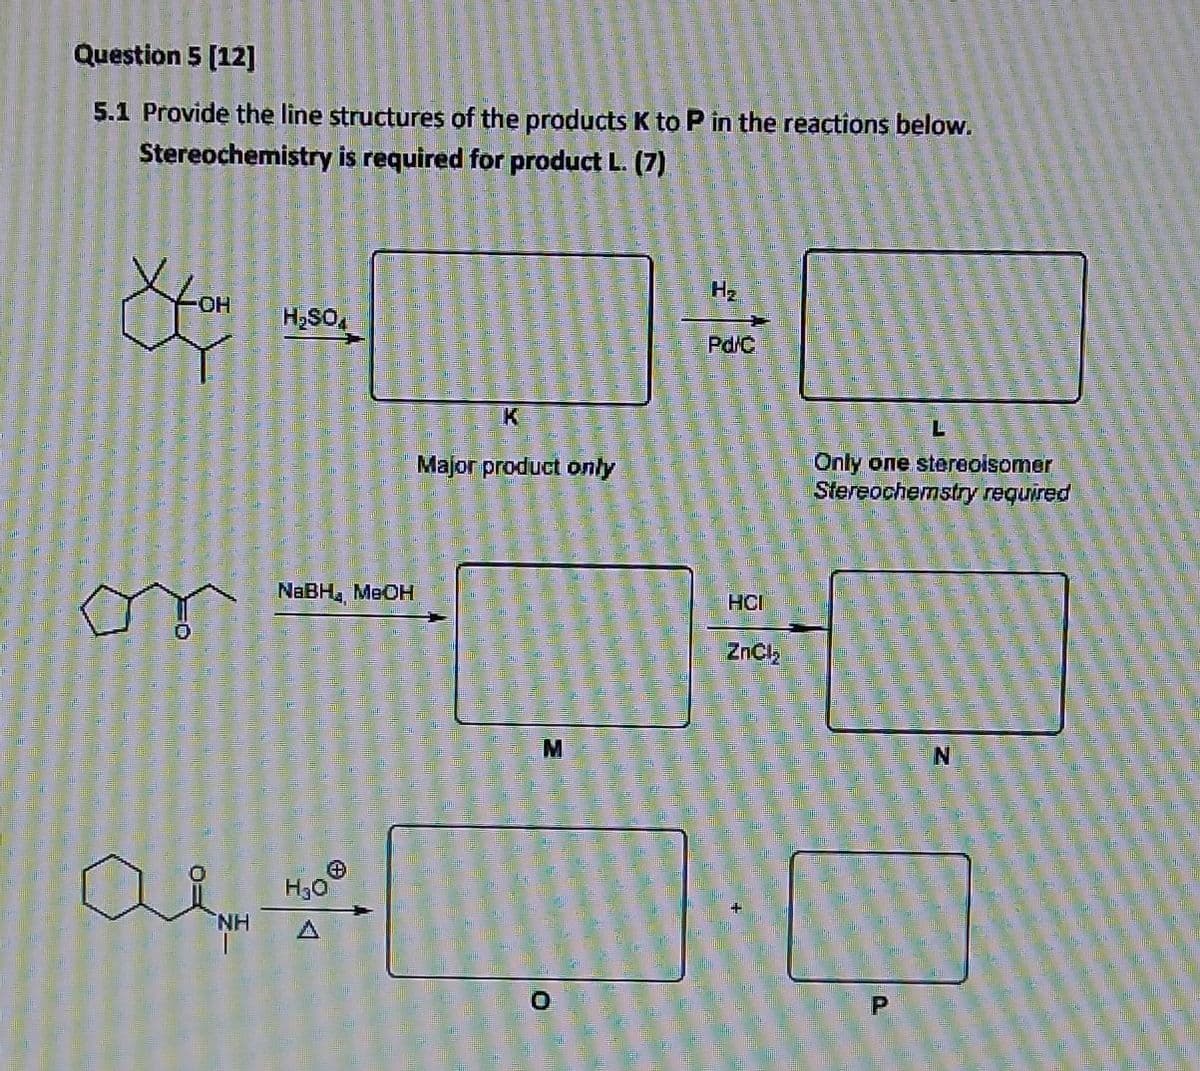 Question 5 (12]
5.1 Provide the line structures of the products K to P in the reactions below.
Stereochemistry is required for product L. (7)
OH
H,SO,
Pd/C
K
7.
Major product only
Only one stereoisomer
Stereochemstry required
NABH, MEOH
HCI
ZnCl,
M
NH
O.
